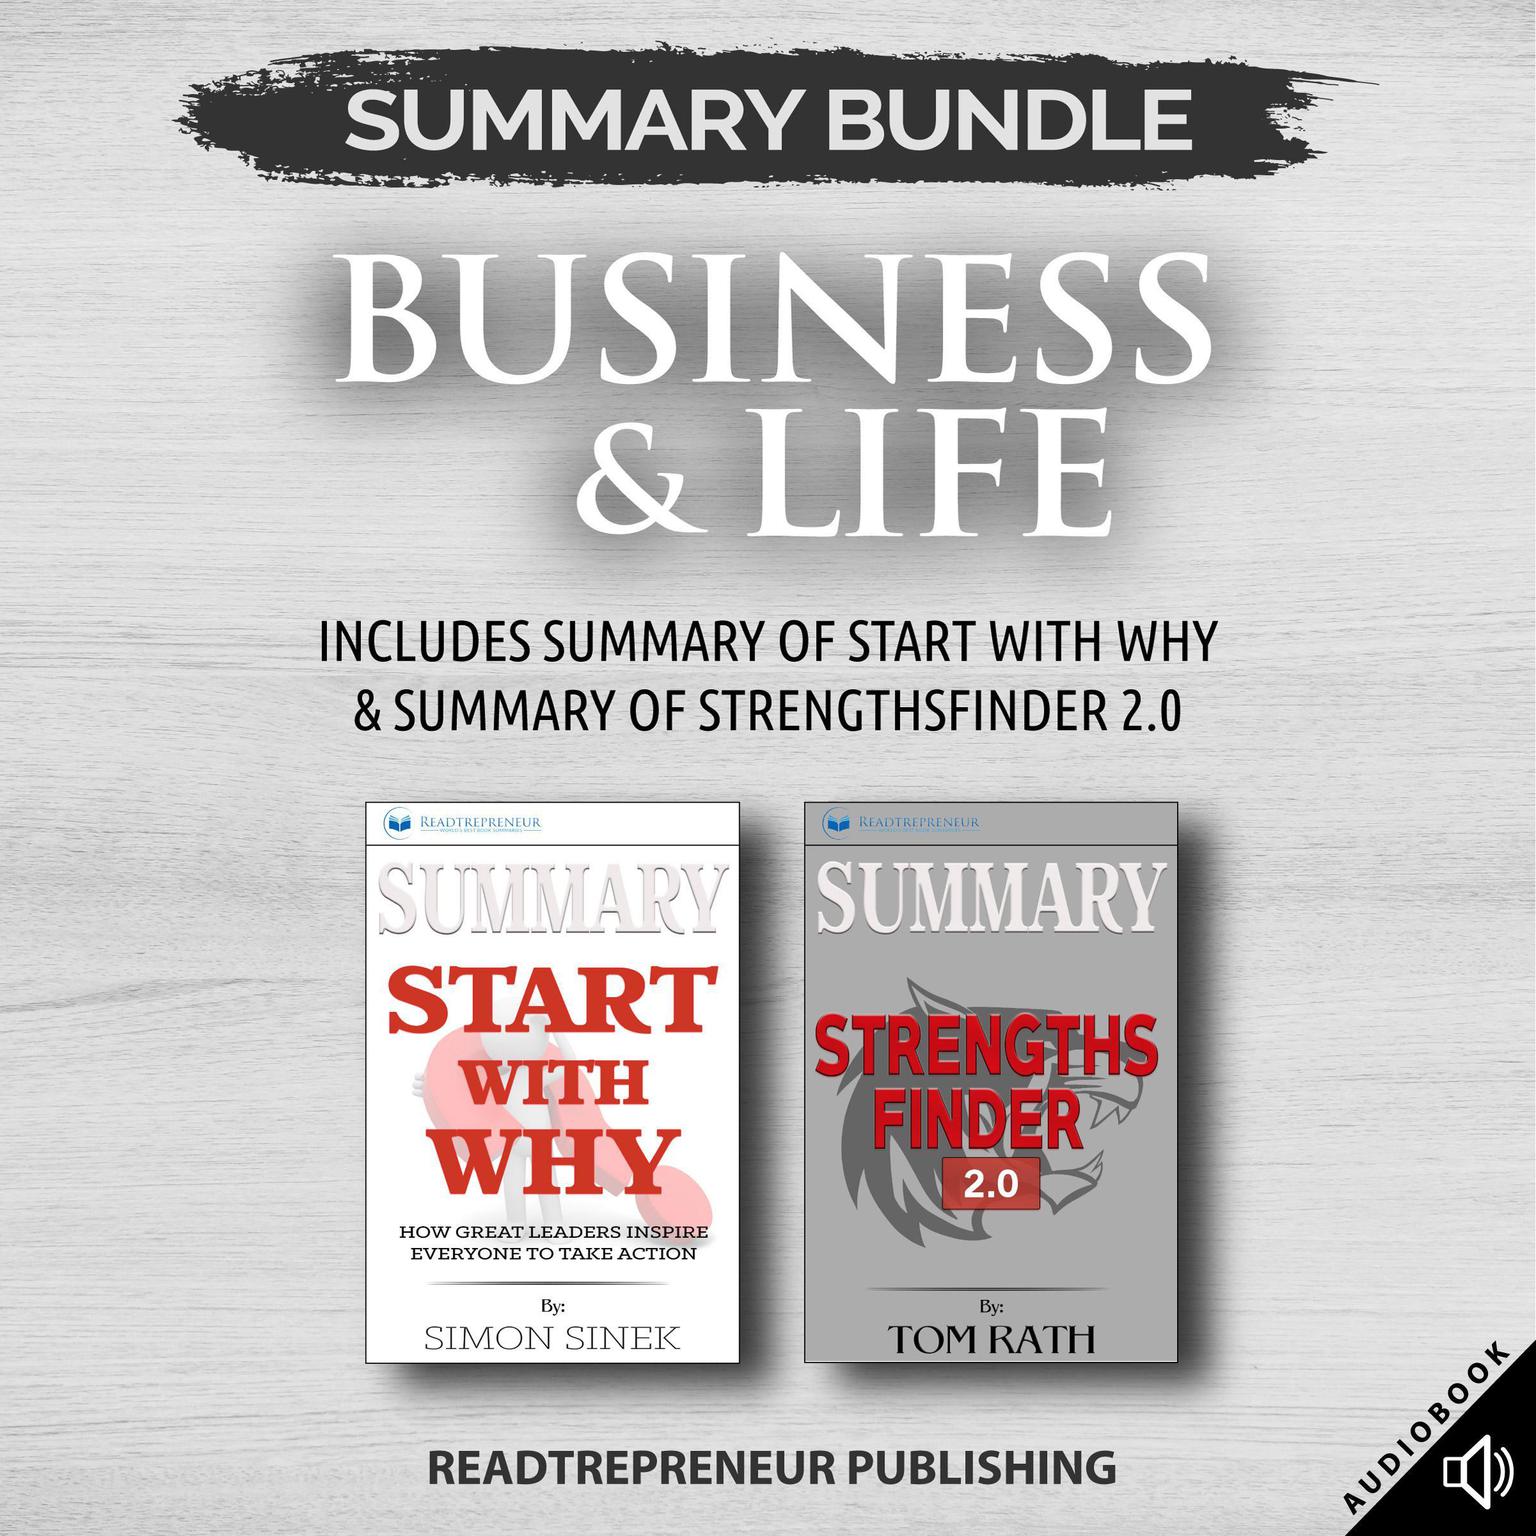 Summary Bundle: Business & Life | Readtrepreneur Publishing: Includes Summary of Start With Why & Summary of StrengthsFinder 2.0 Audiobook, by Readtrepreneur Publishing